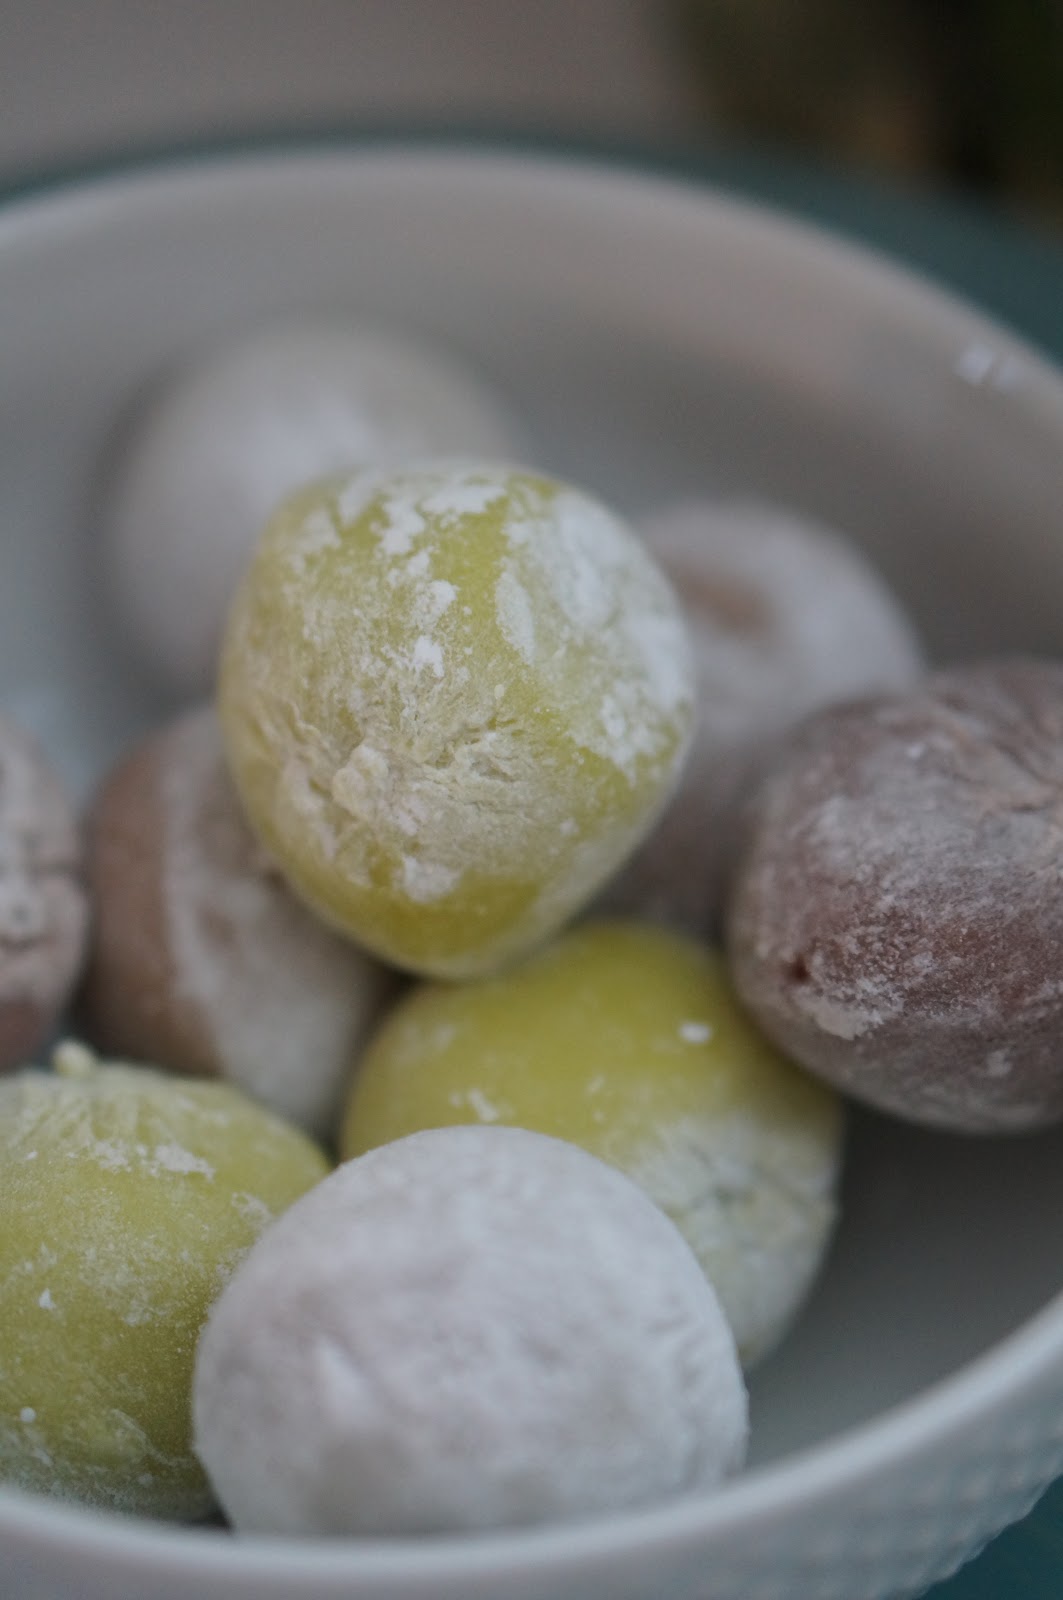 Popular North Carolina style blogger shares how she is snacking this summer with My/Mo Mochi Ice Cream. Click here to read about this delicious snack!